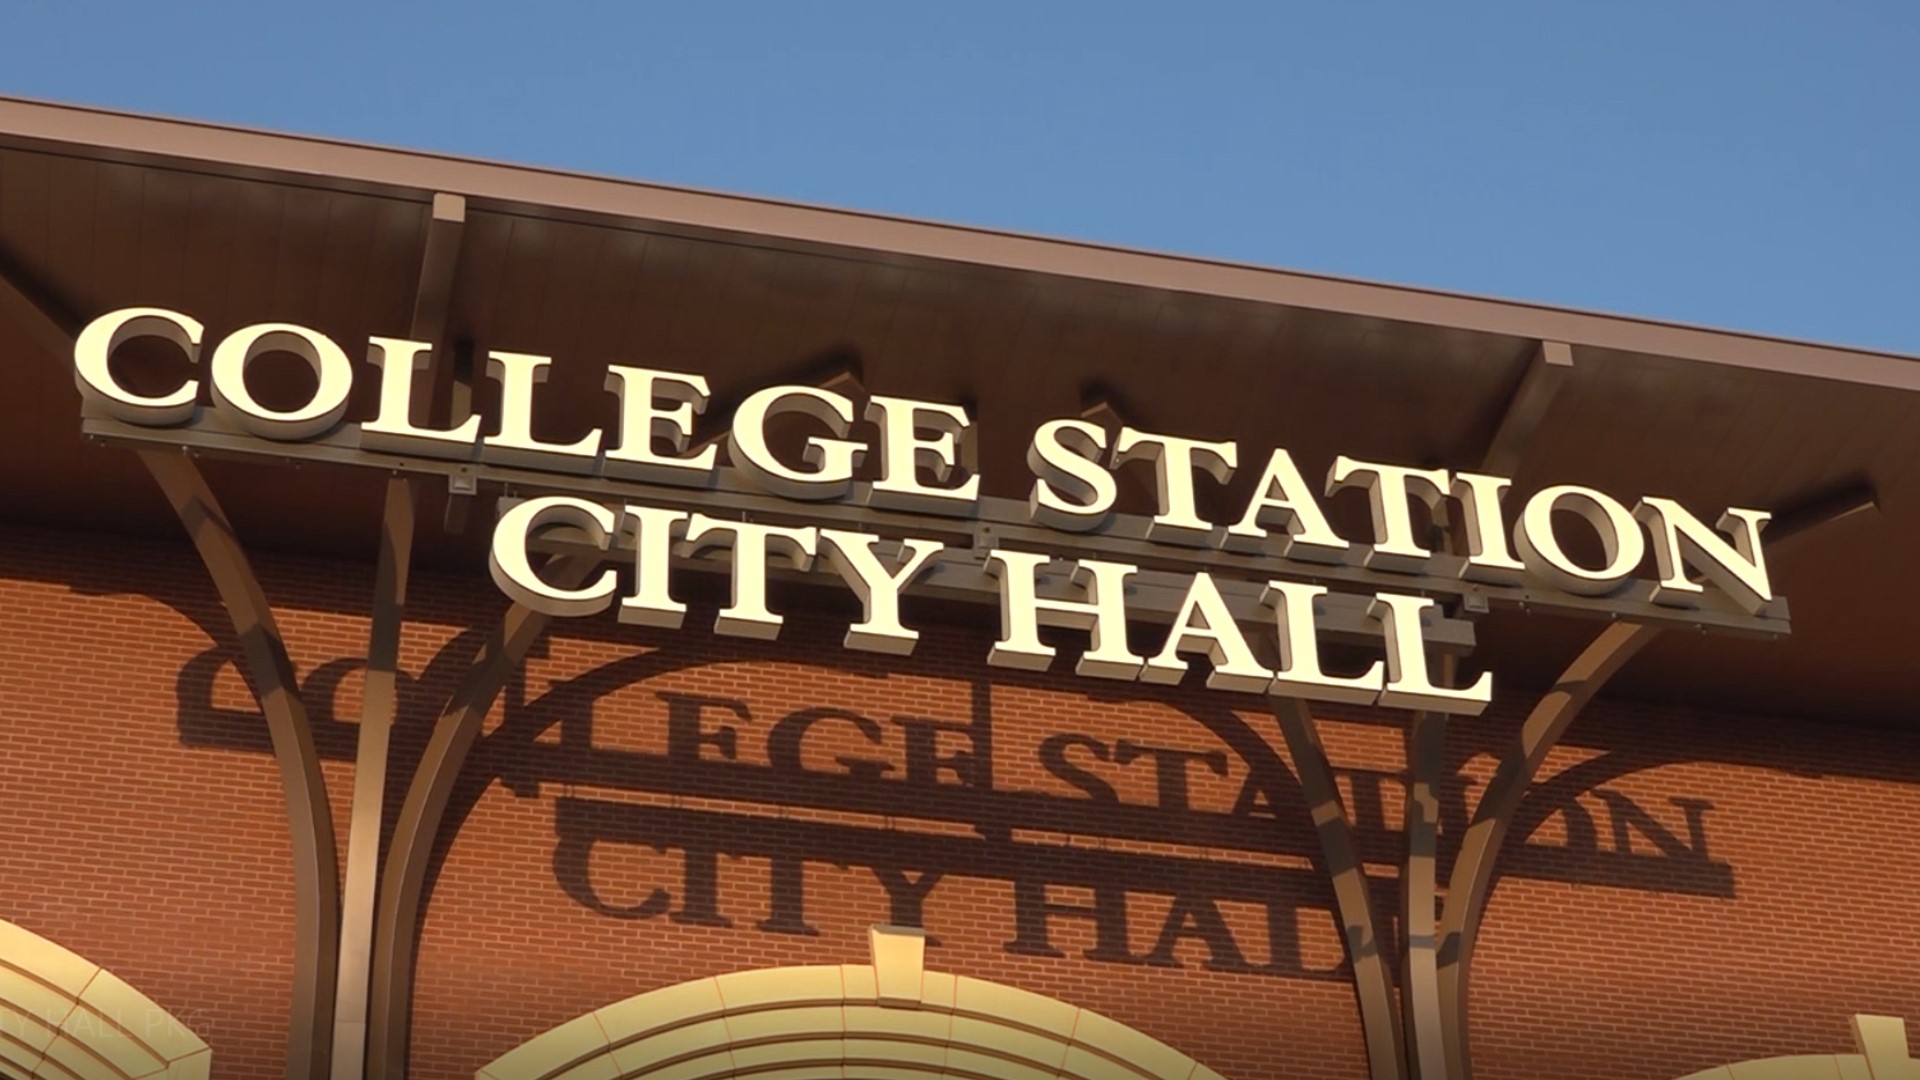 The city of College Station unveiled and dedicated its new city hall today after years of planning.